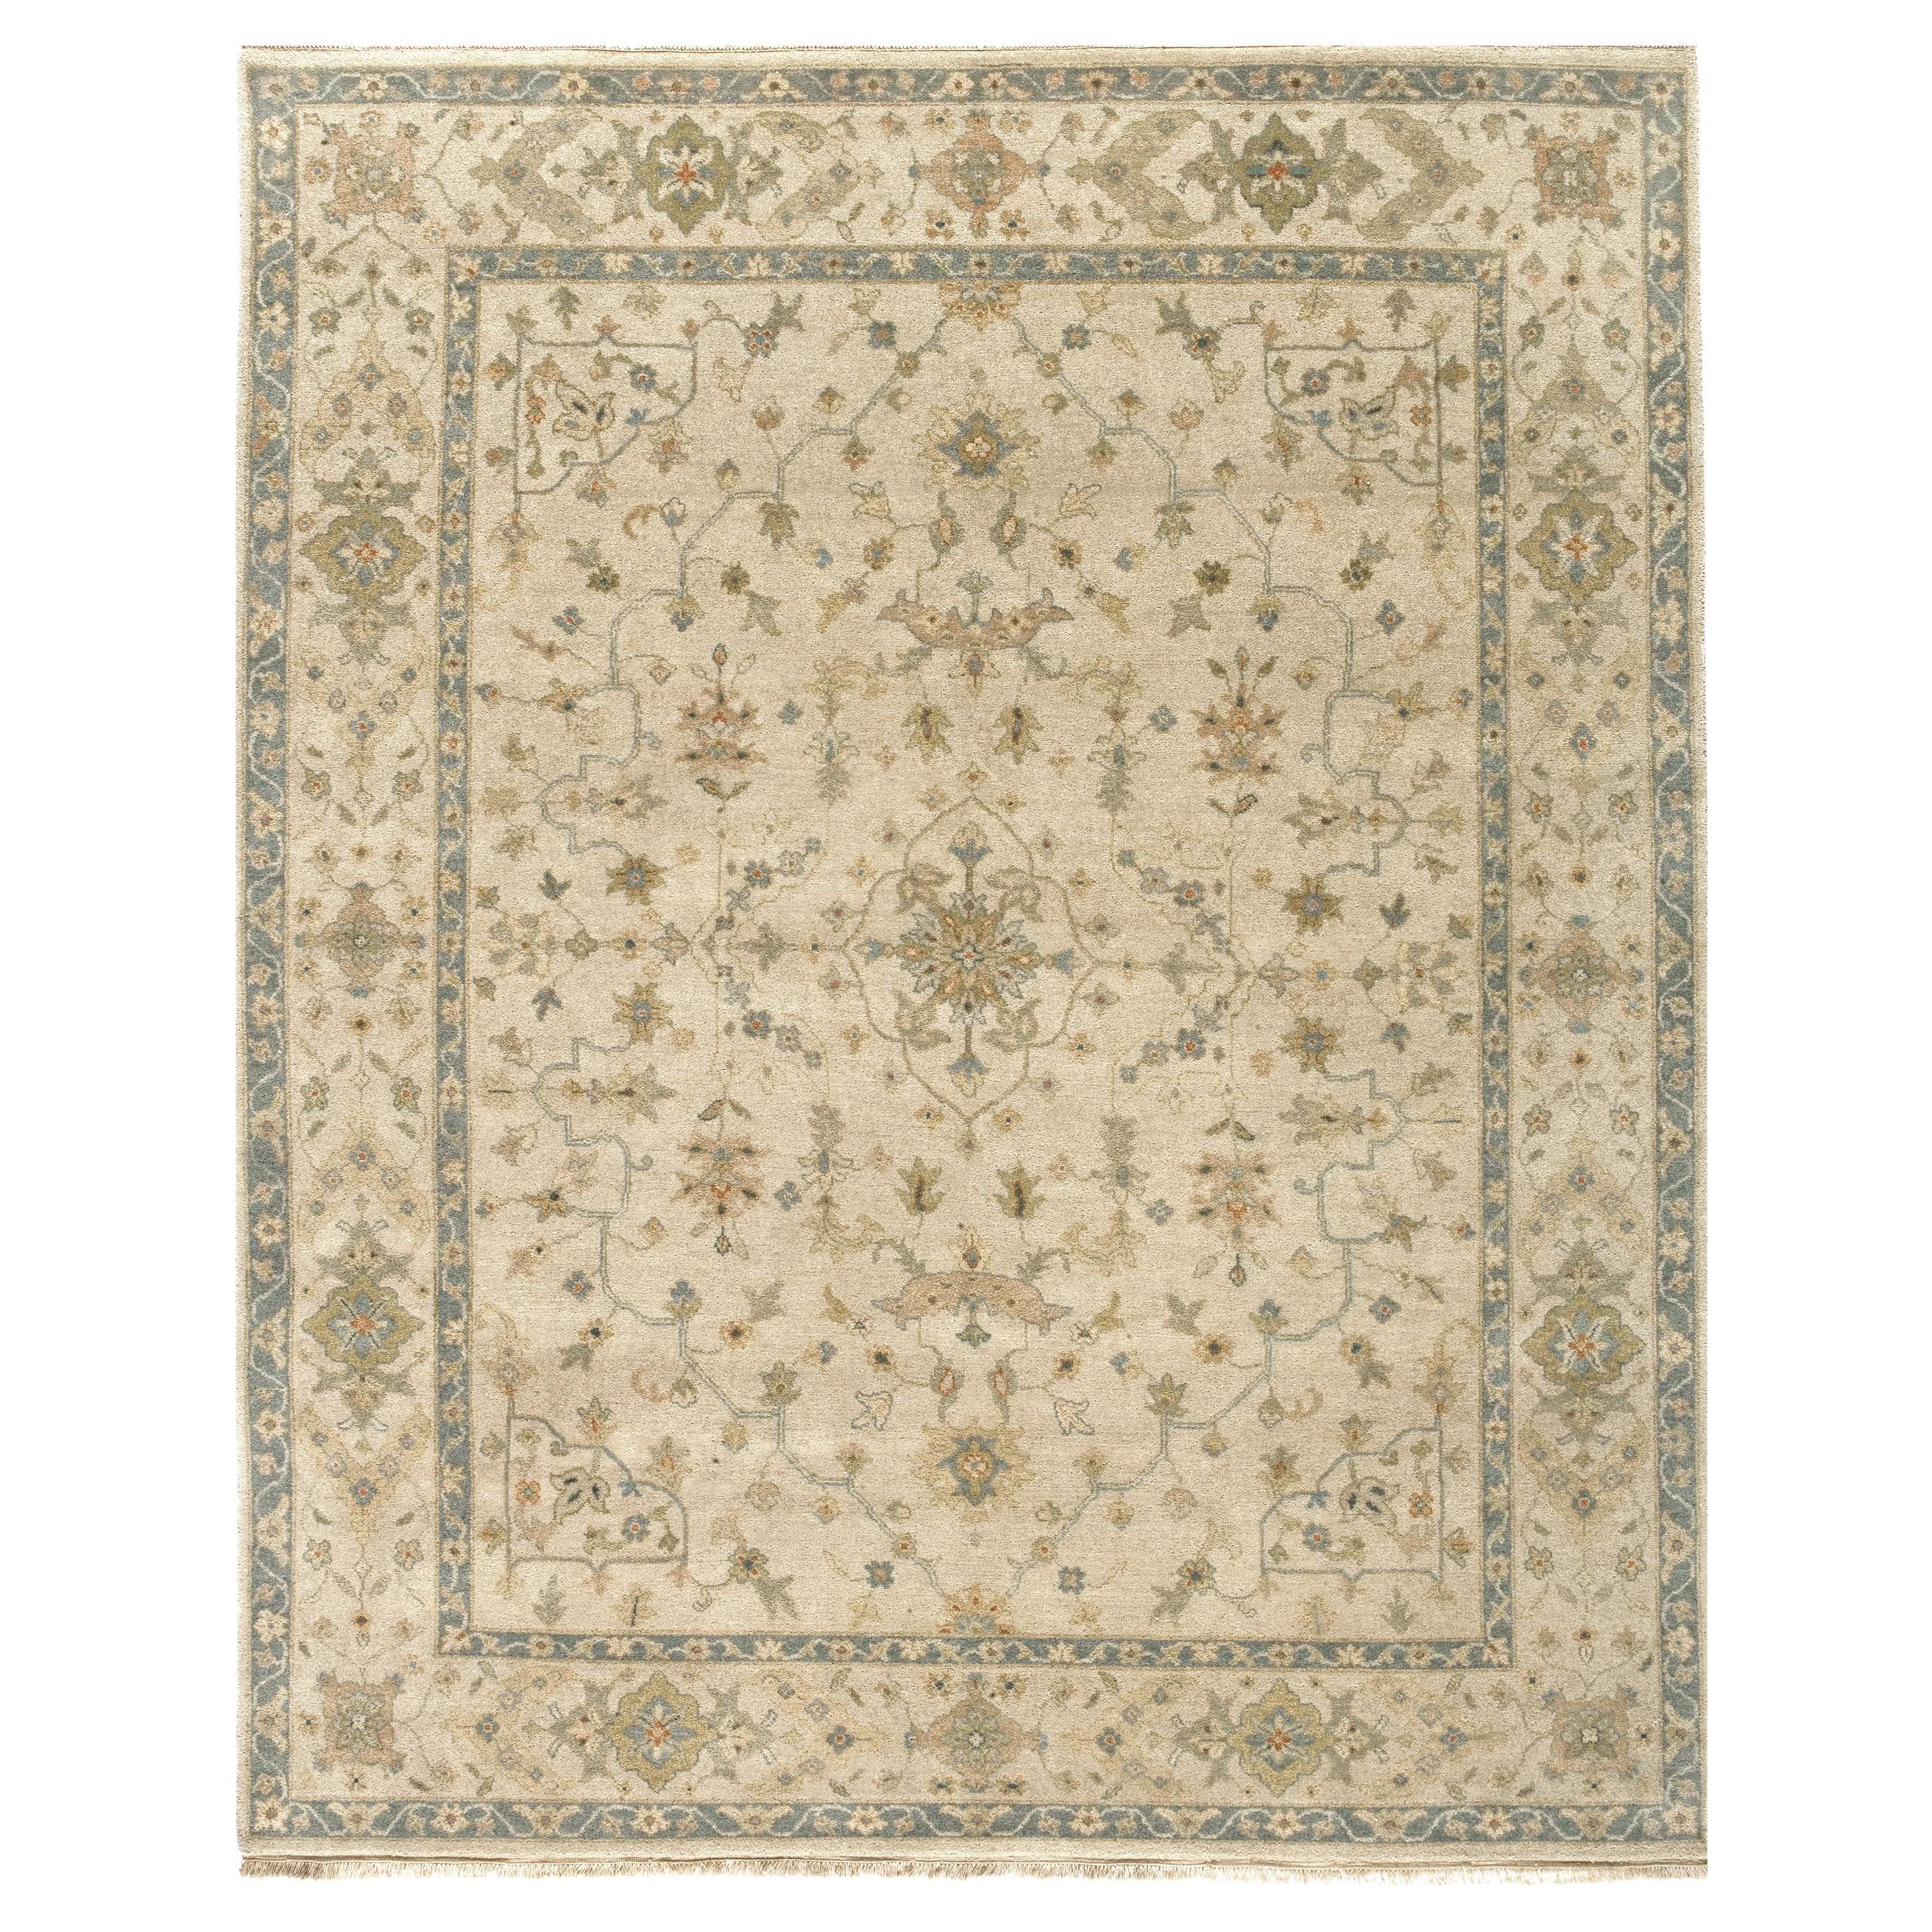 Luxury Traditional Hand-Knotted Herati Beige 11x19 Rug